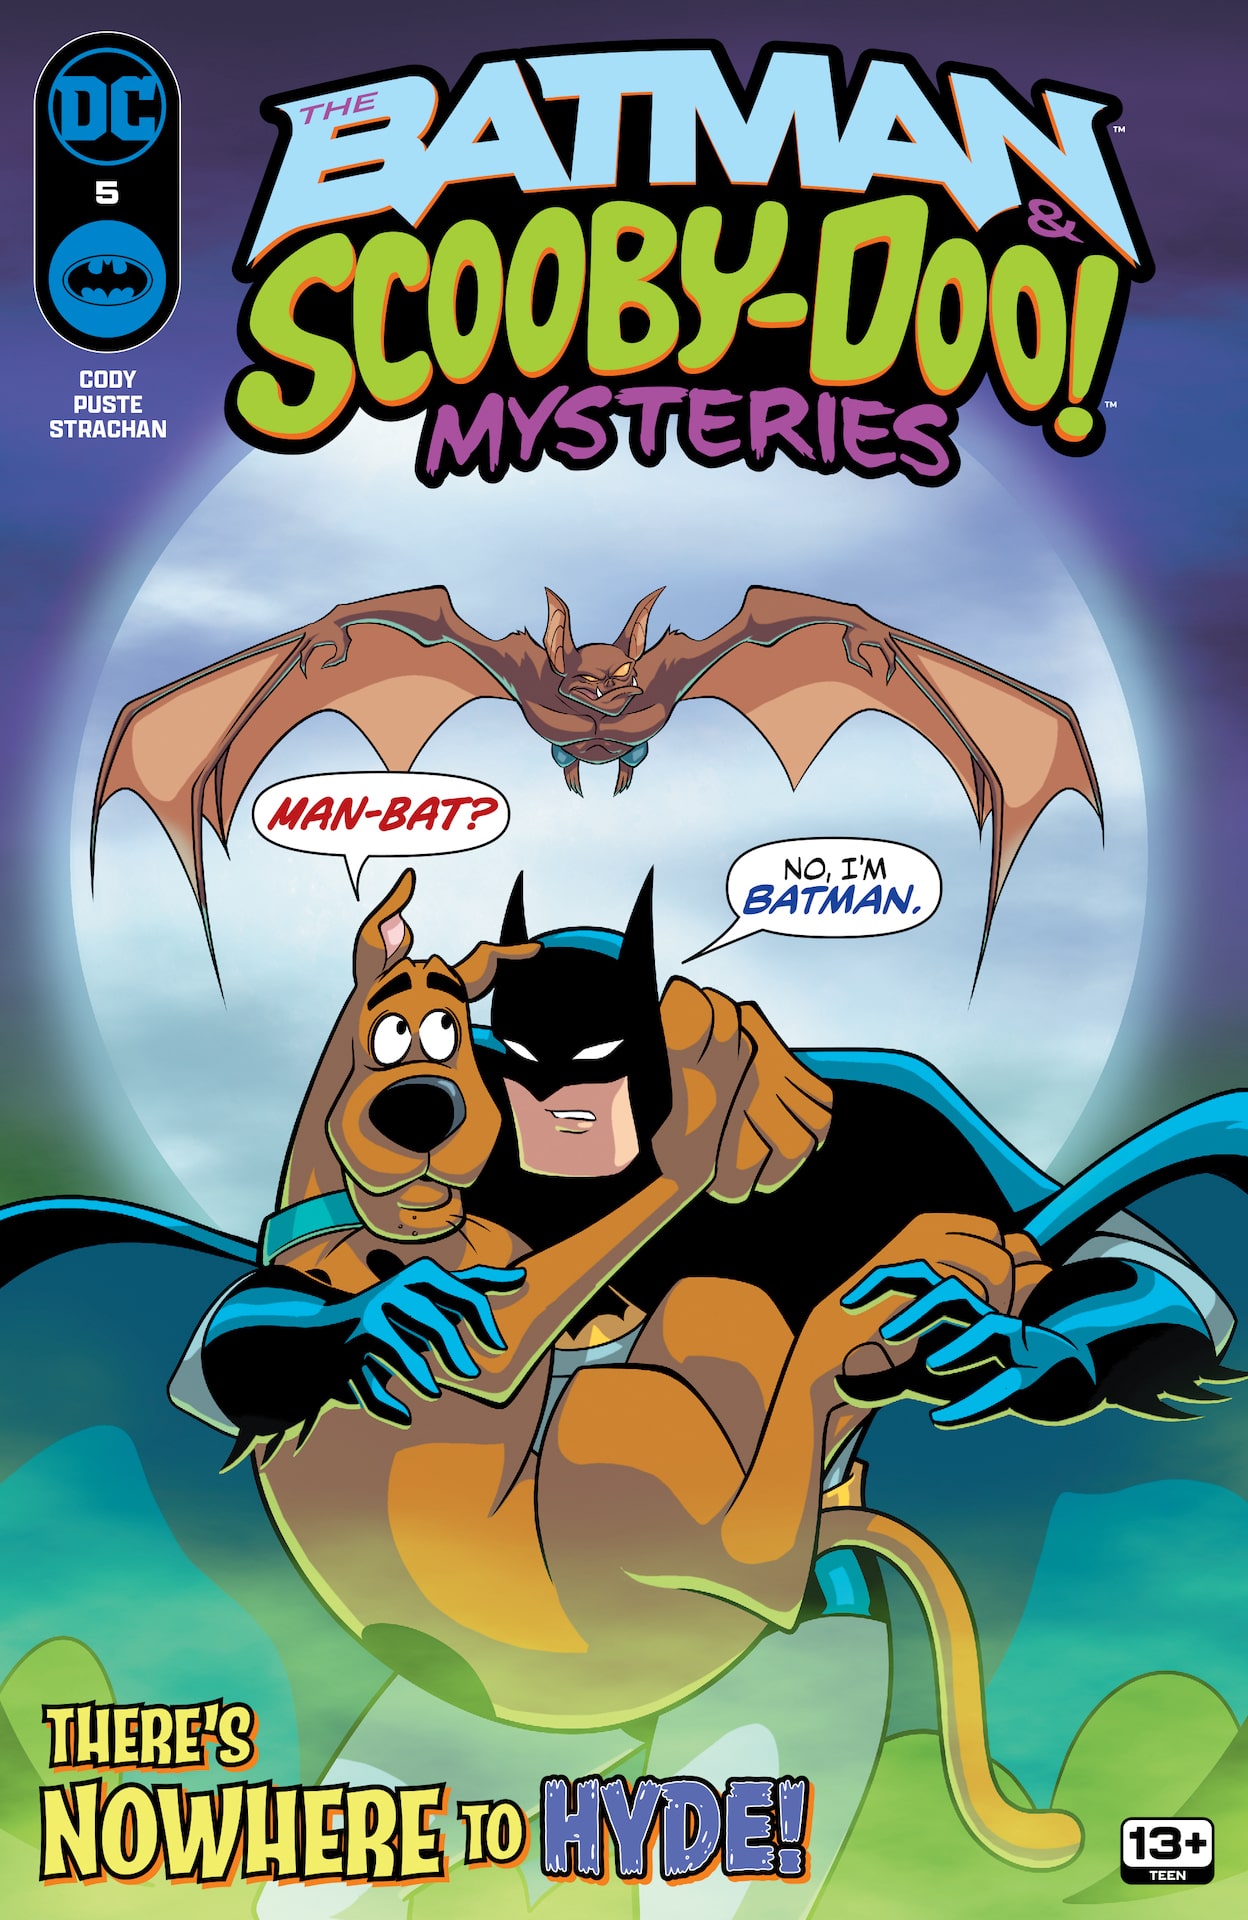 DC Preview: The Batman & Scooby-Doo Mysteries #5